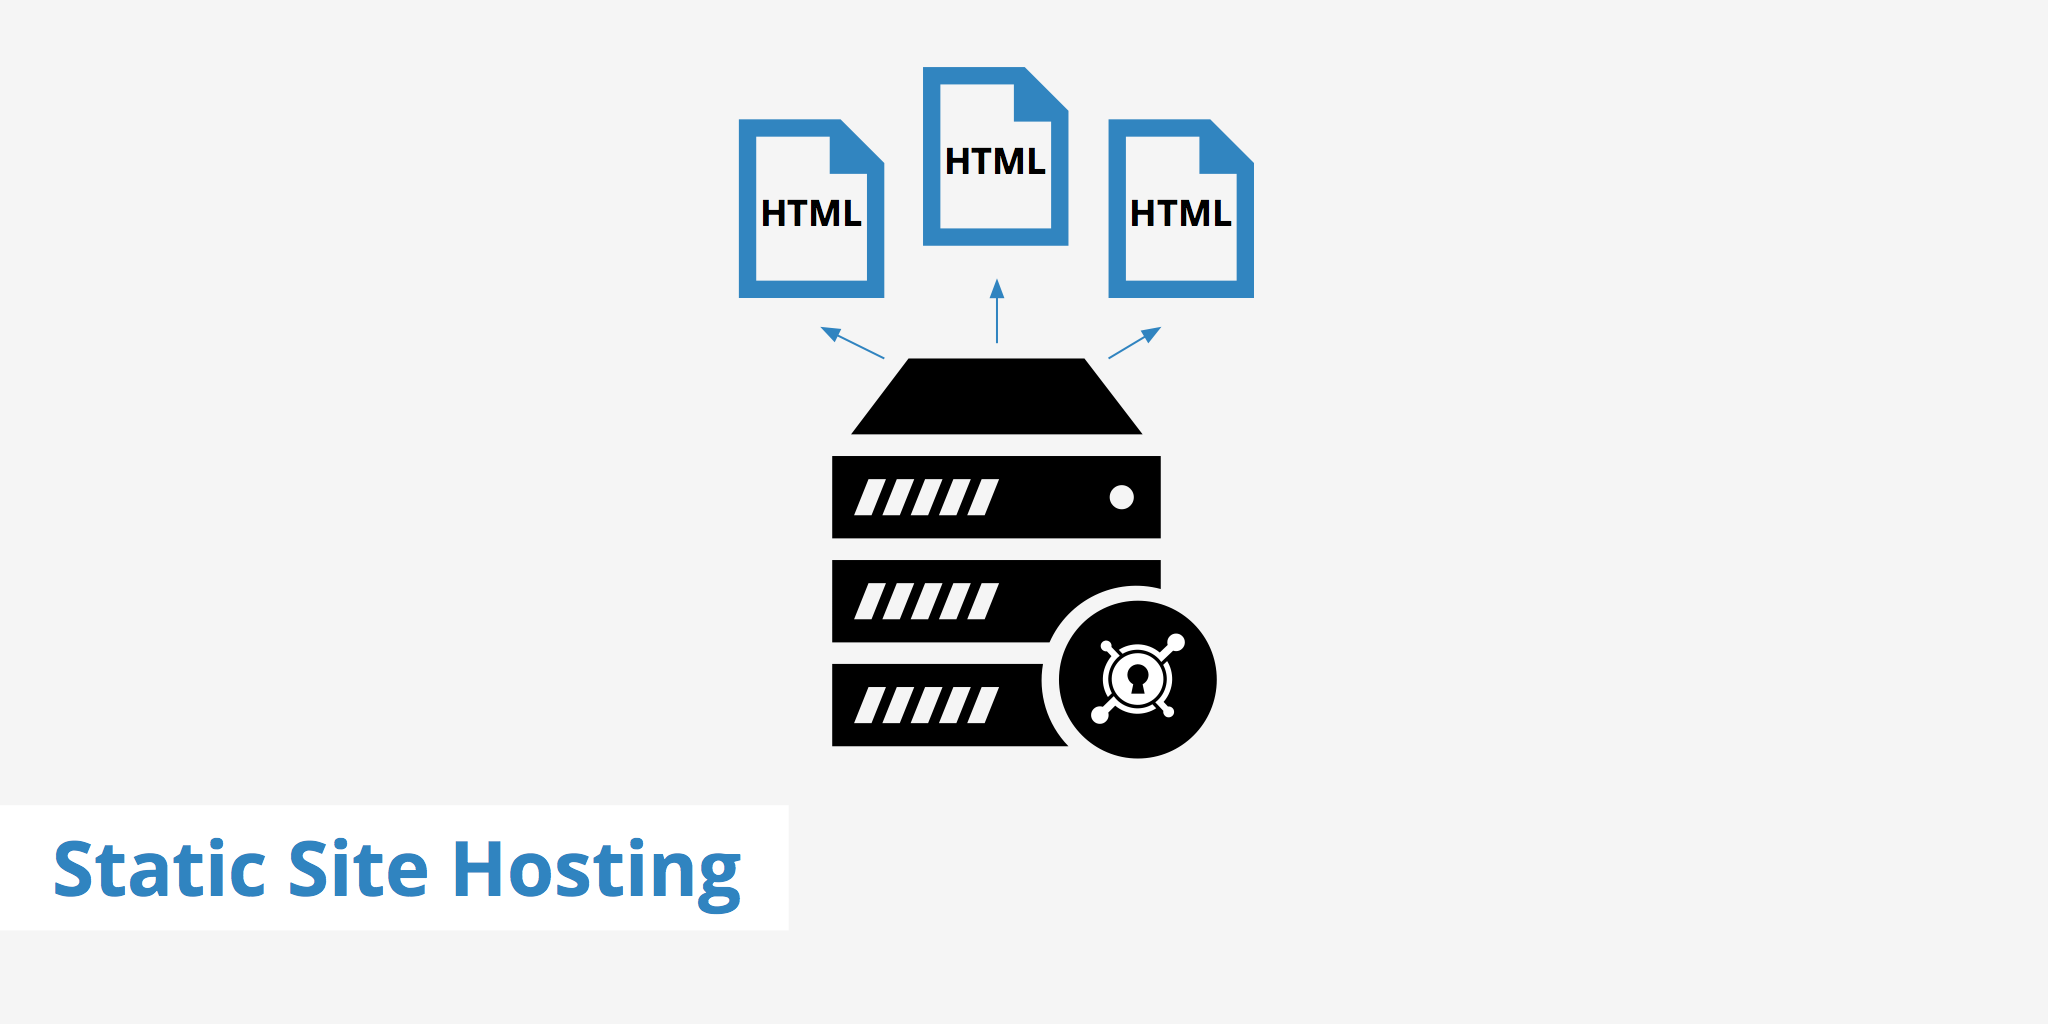 Static Site Hosting with a CDN